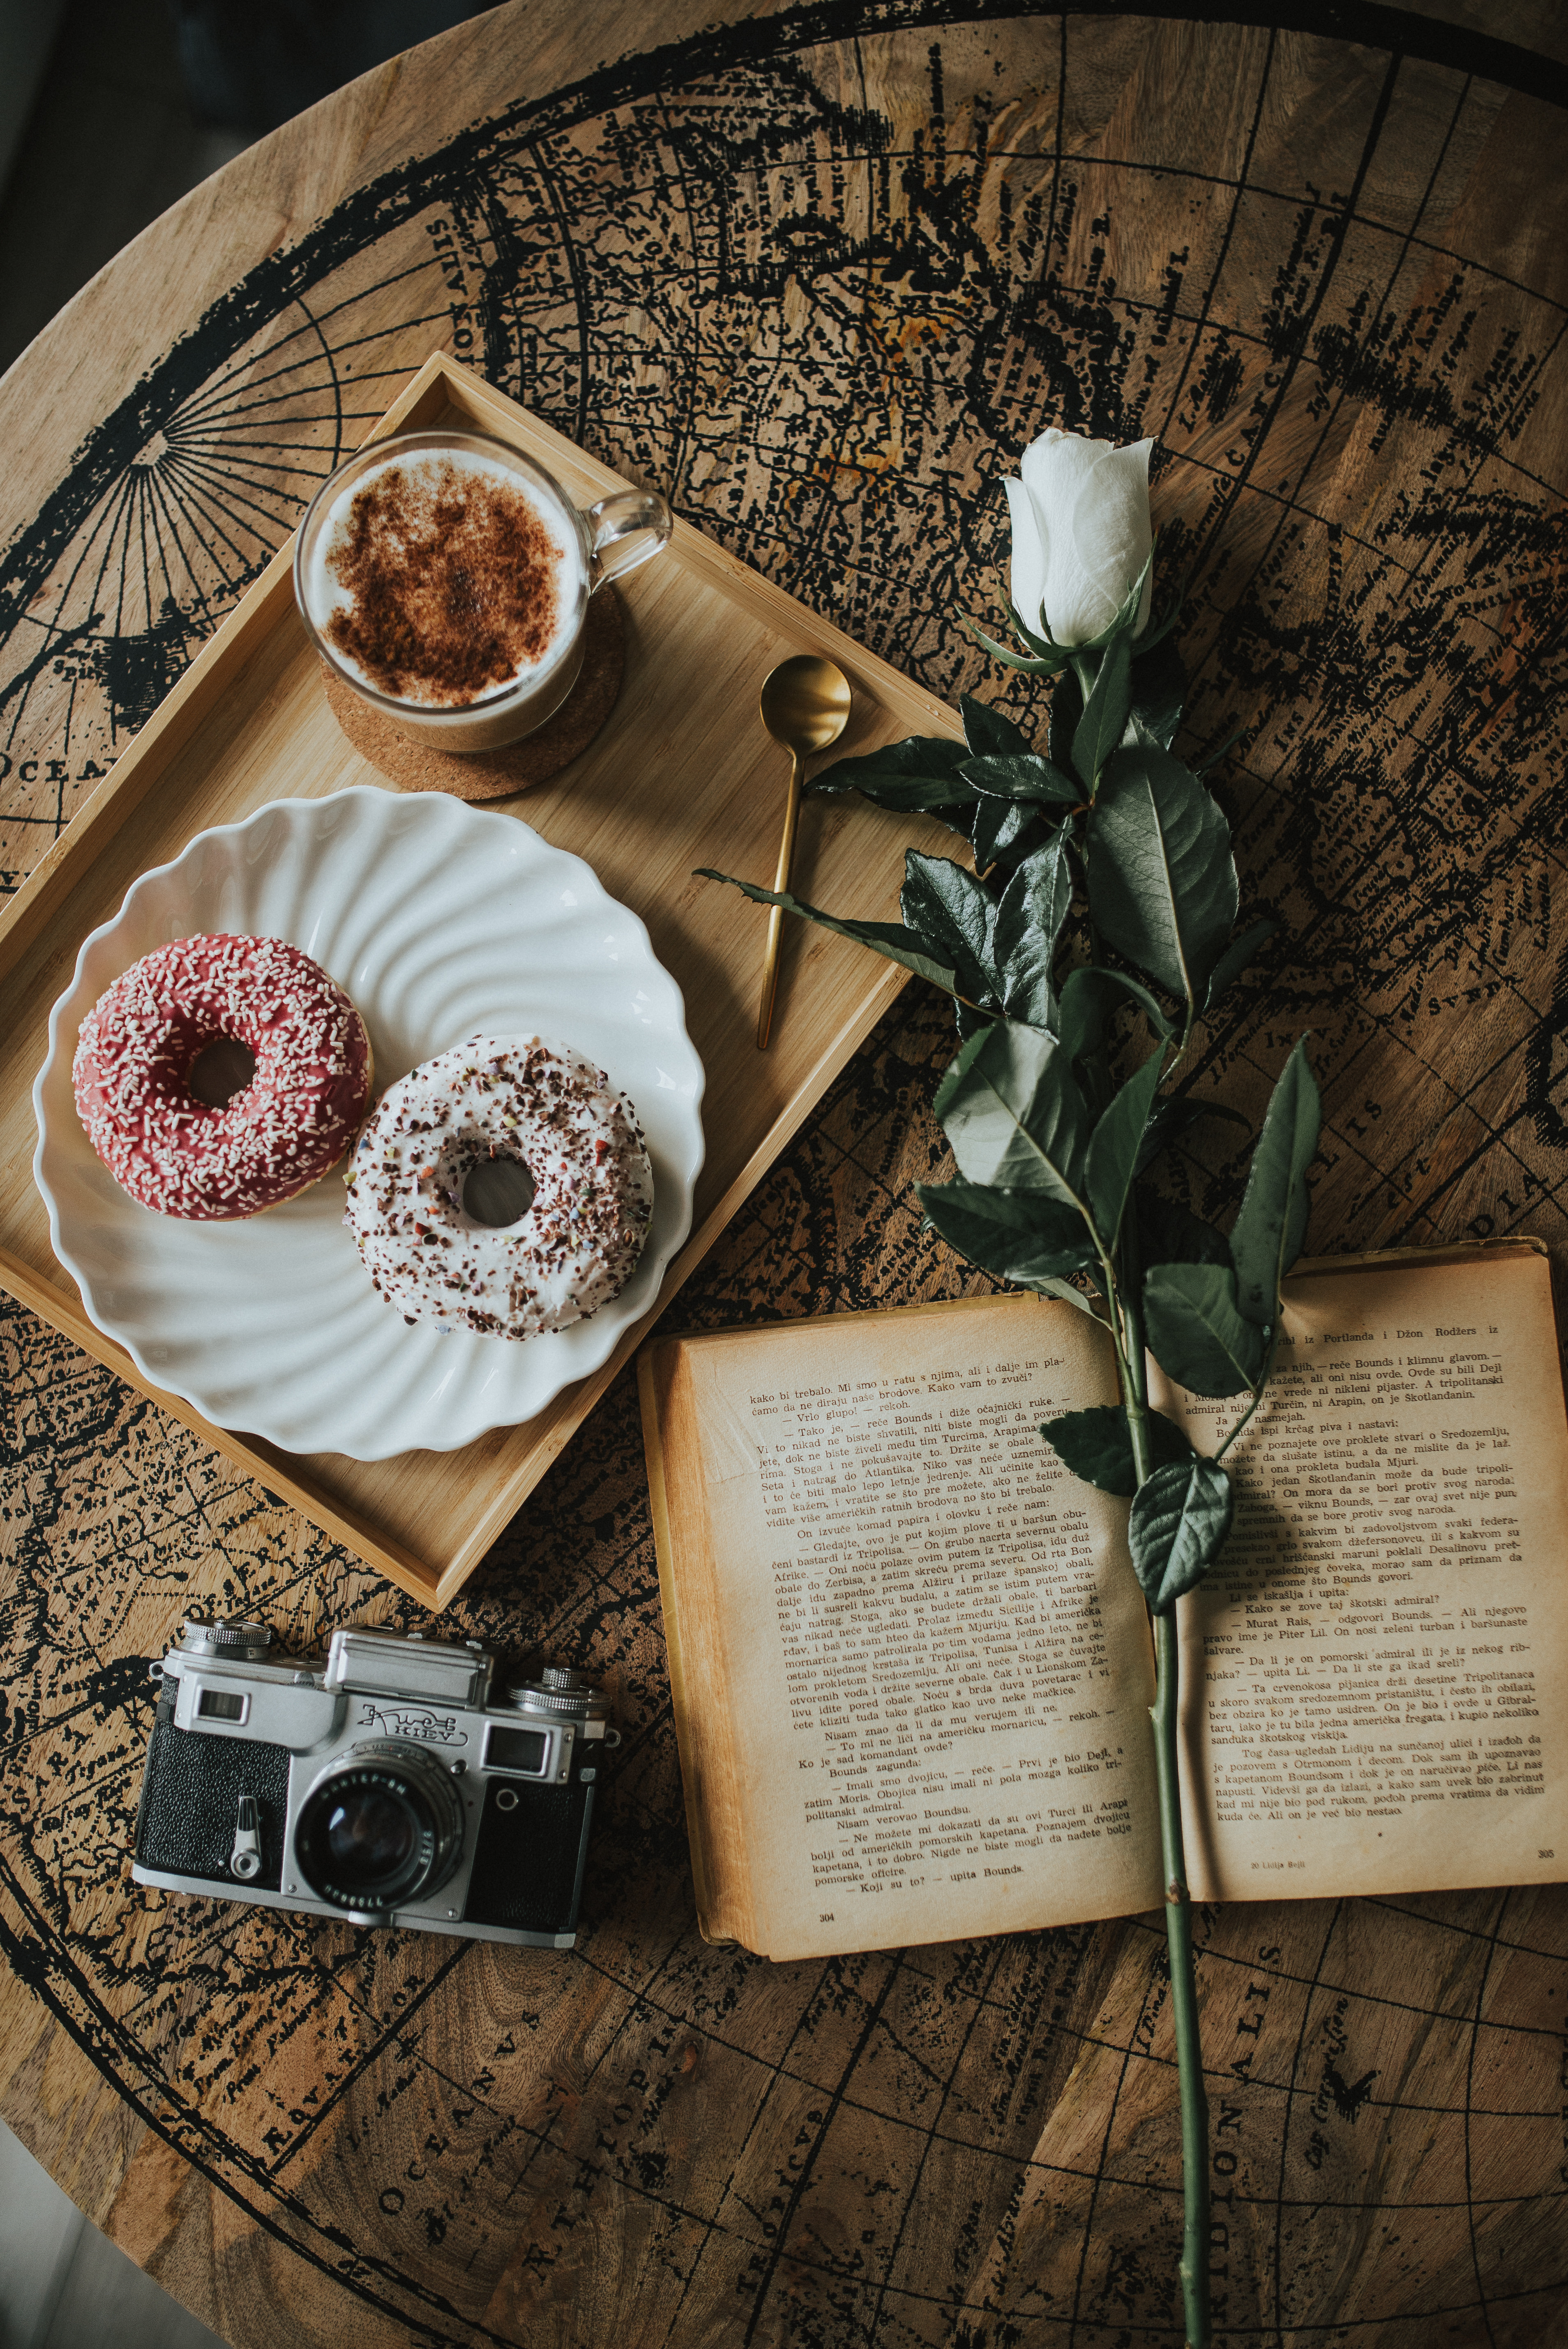 53218 Screensavers and Wallpapers Donuts for phone. Download coffee, flower, miscellanea, miscellaneous, cup, book, camera, donuts pictures for free